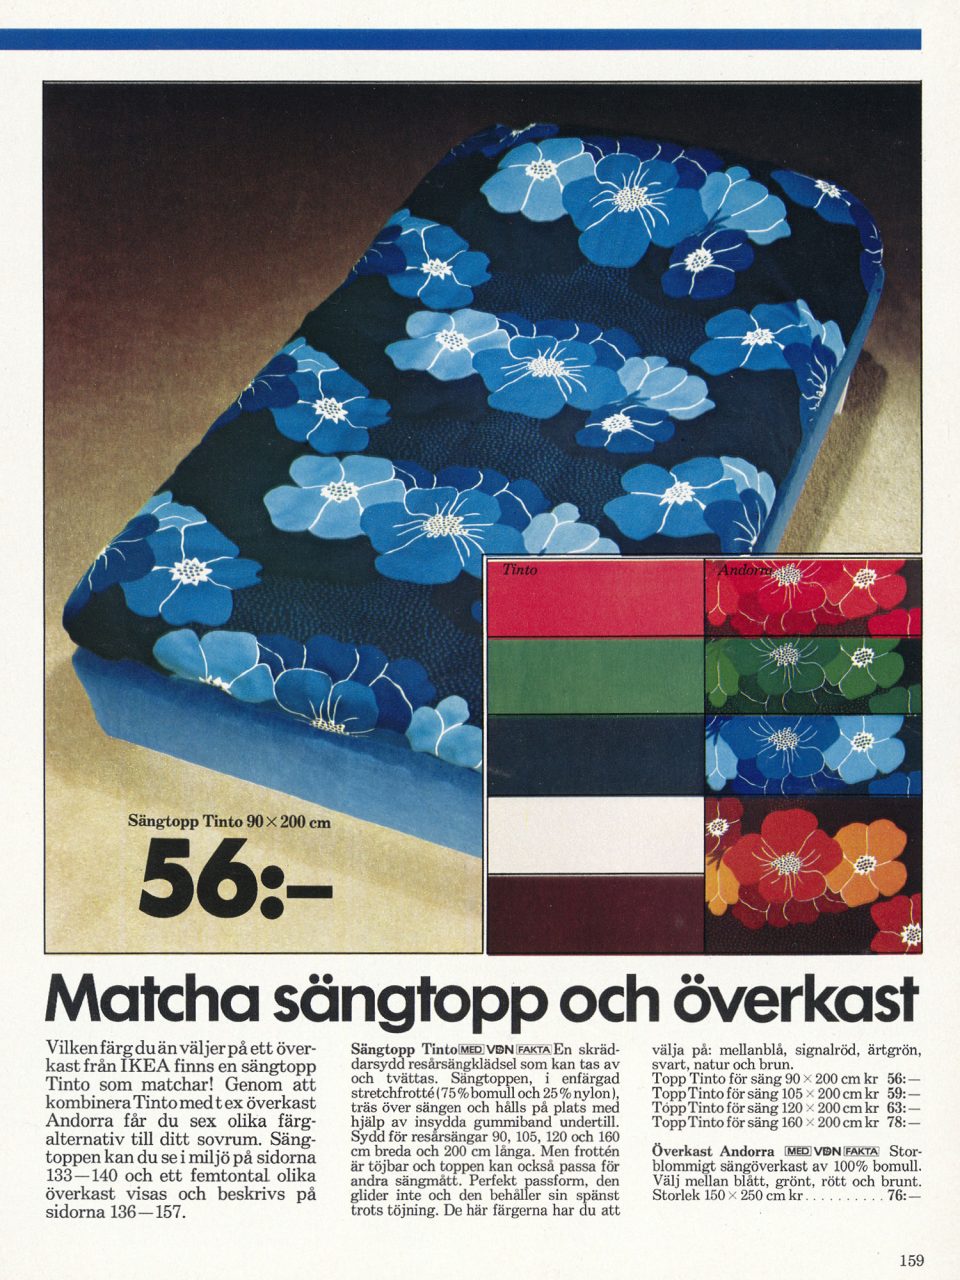 1977 IKEA catalogue page featuring TINTO bed top with large blue flowers on a black base.